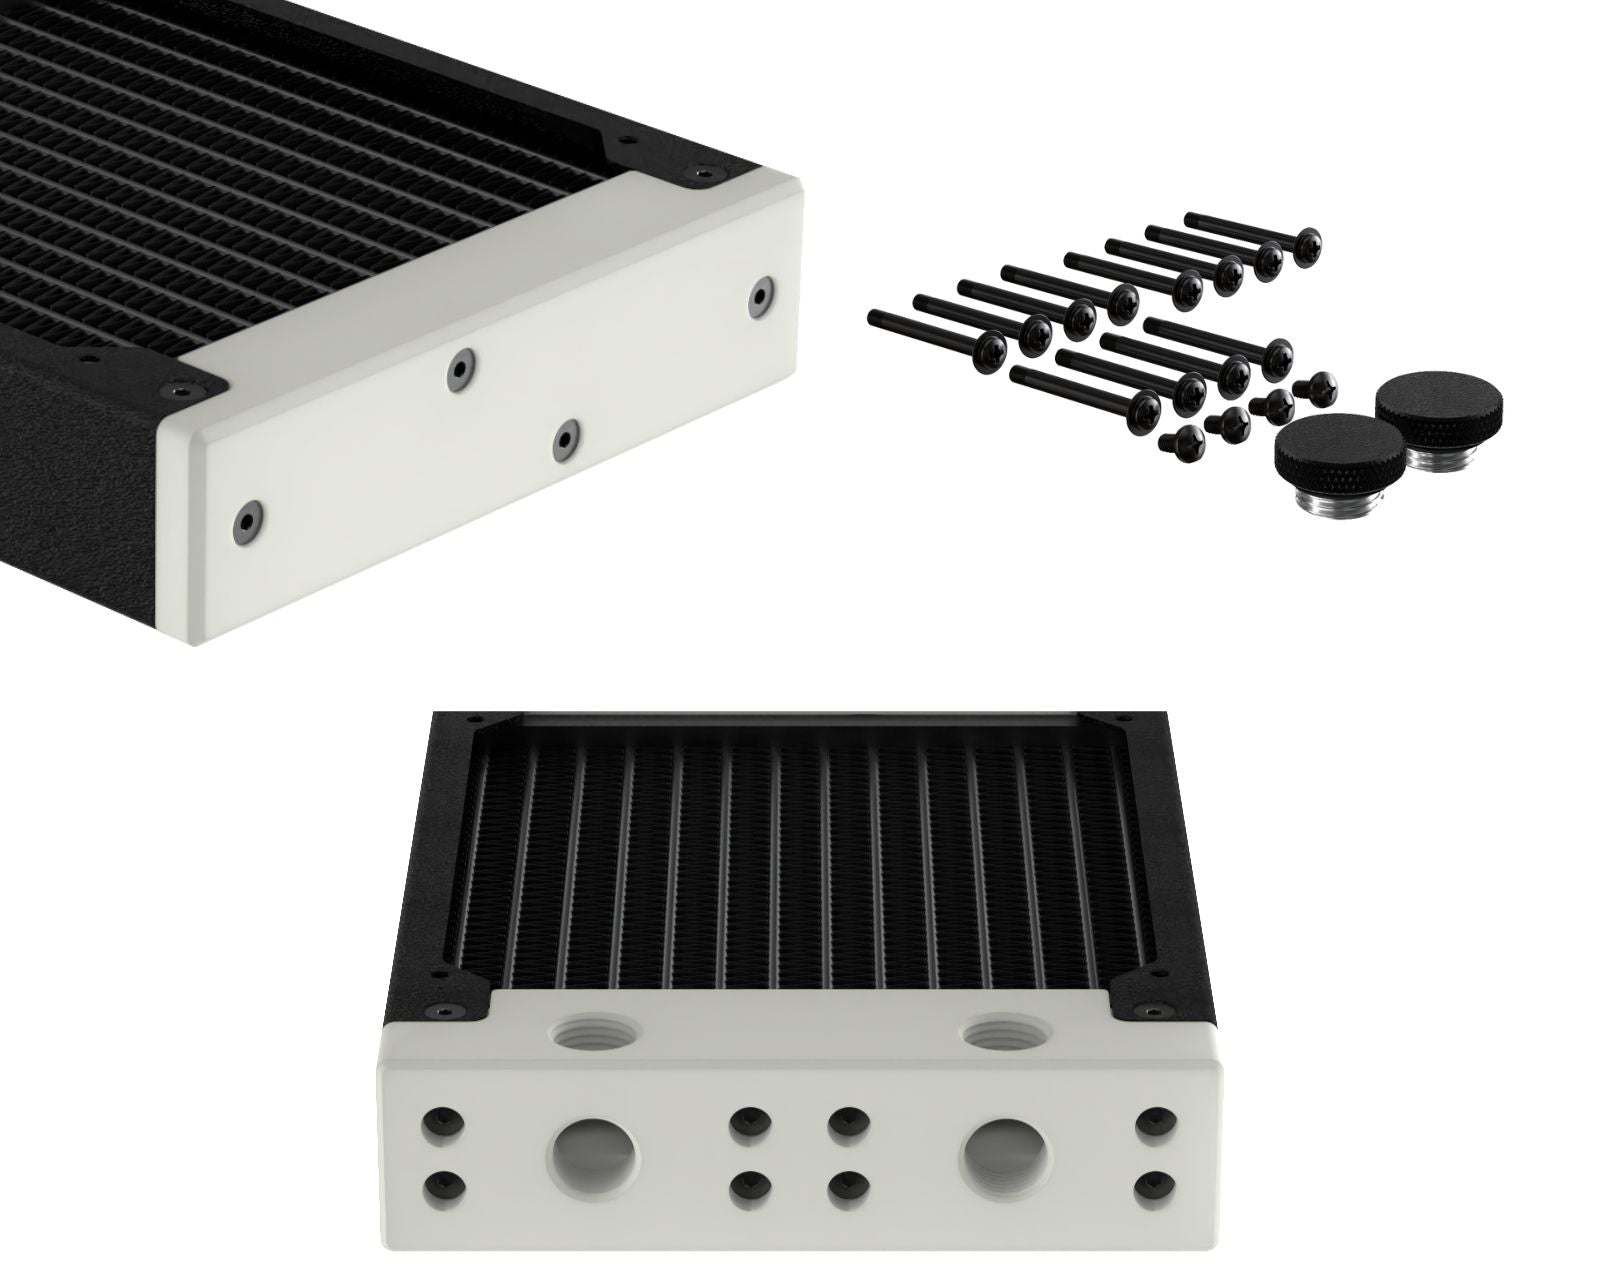 PrimoChill 360SL (30mm) EXIMO Modular Radiator, White POM, 3x120mm, Triple Fan (R-SL-W36) Available in 20+ Colors, Assembled in USA and Custom Watercooling Loop Ready - TX Matte Black